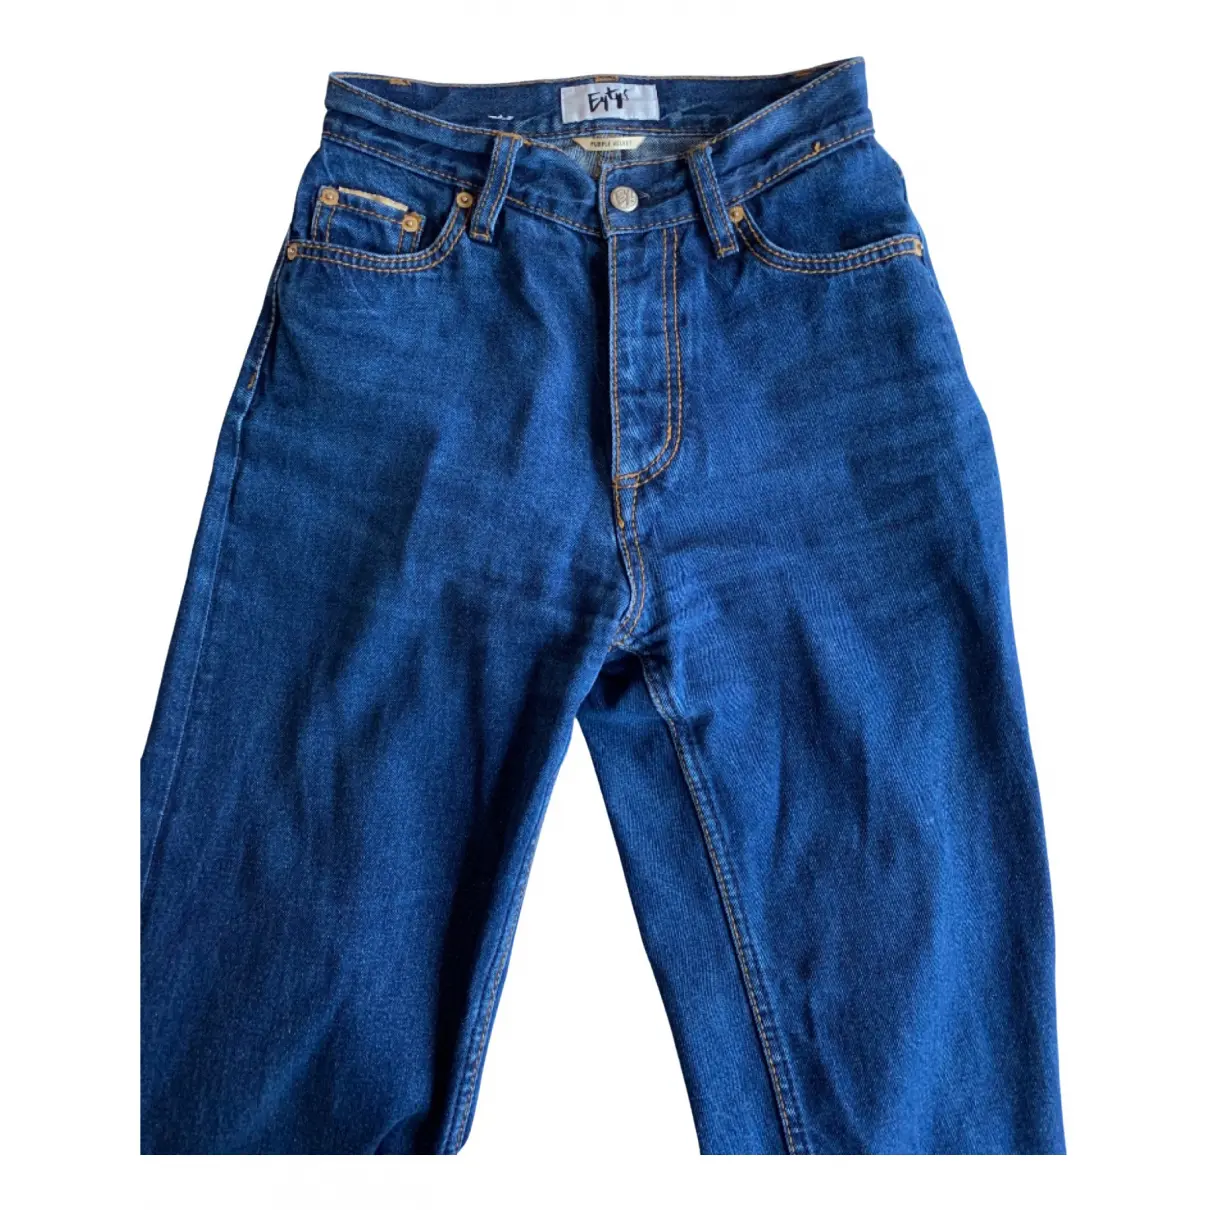 Buy Eytys Straight jeans online